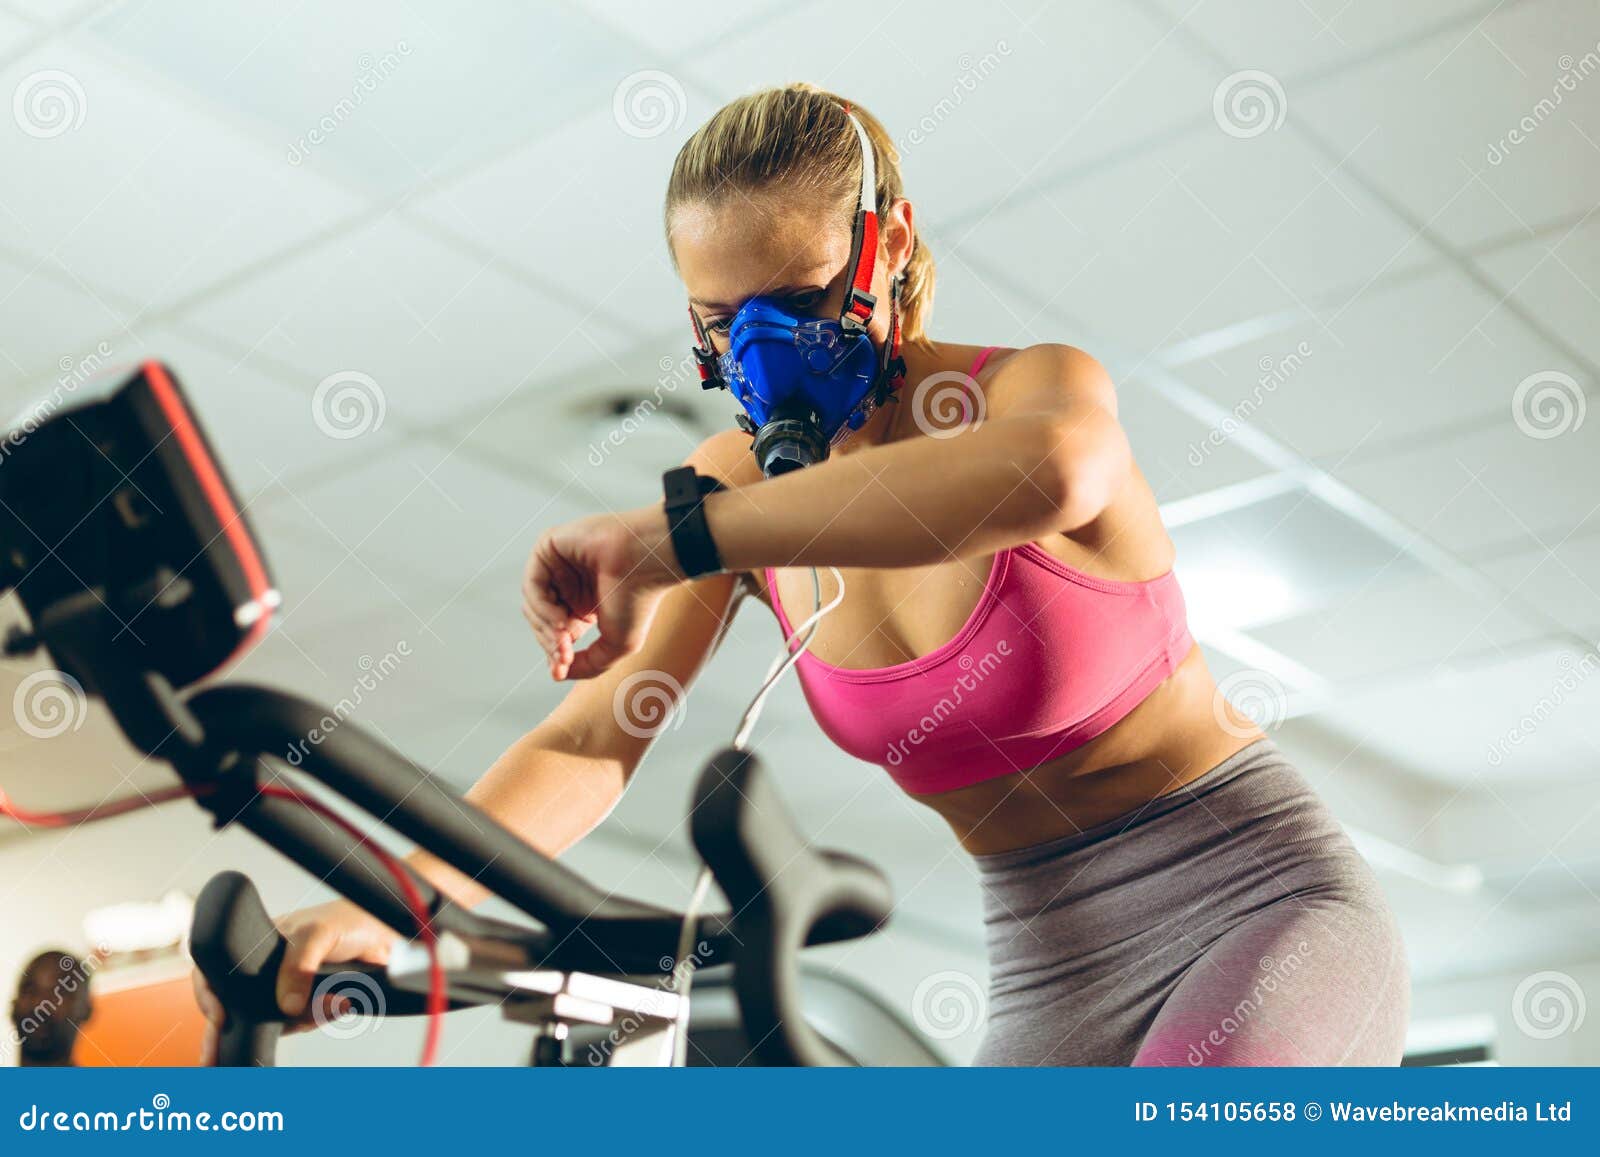 Athlete with Oxygen Mask Checking Time while Exercising with Bike in Fitness Studio Stock Photo Image of active, healthy: 154105658